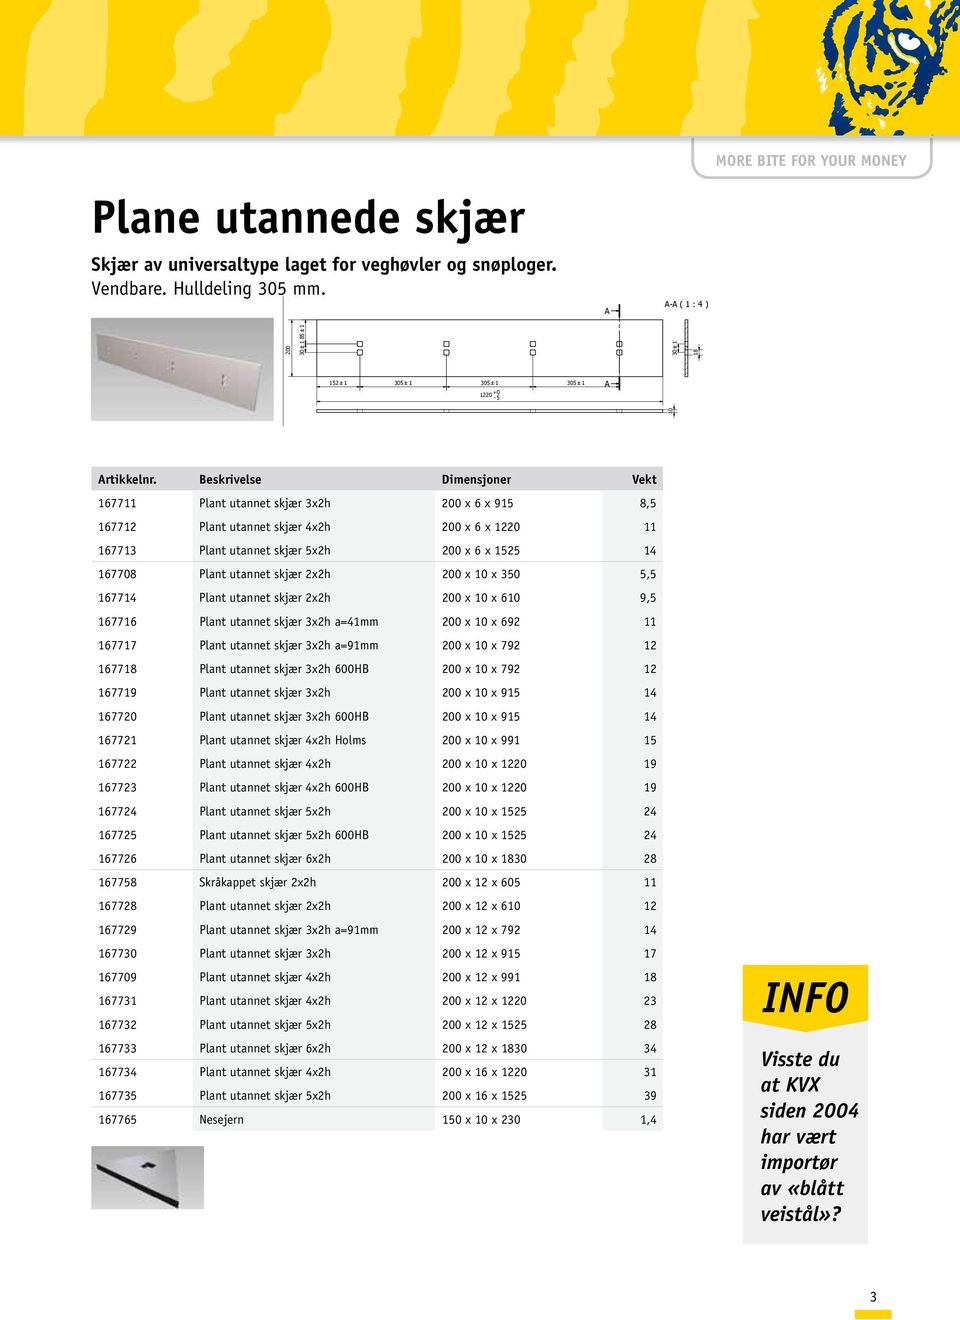 pproved by ate ate, 77 Plant utannet skjær xh 00 x 0 x 0 9, 77 Plant utannet skjær xh a=mm 00 x 0 x 9 / 777 Plant utannet skjær xh a=9mm 00 x 0 x 79 778 Plant utannet skjær xh 00H 00 x 0 x 79 779